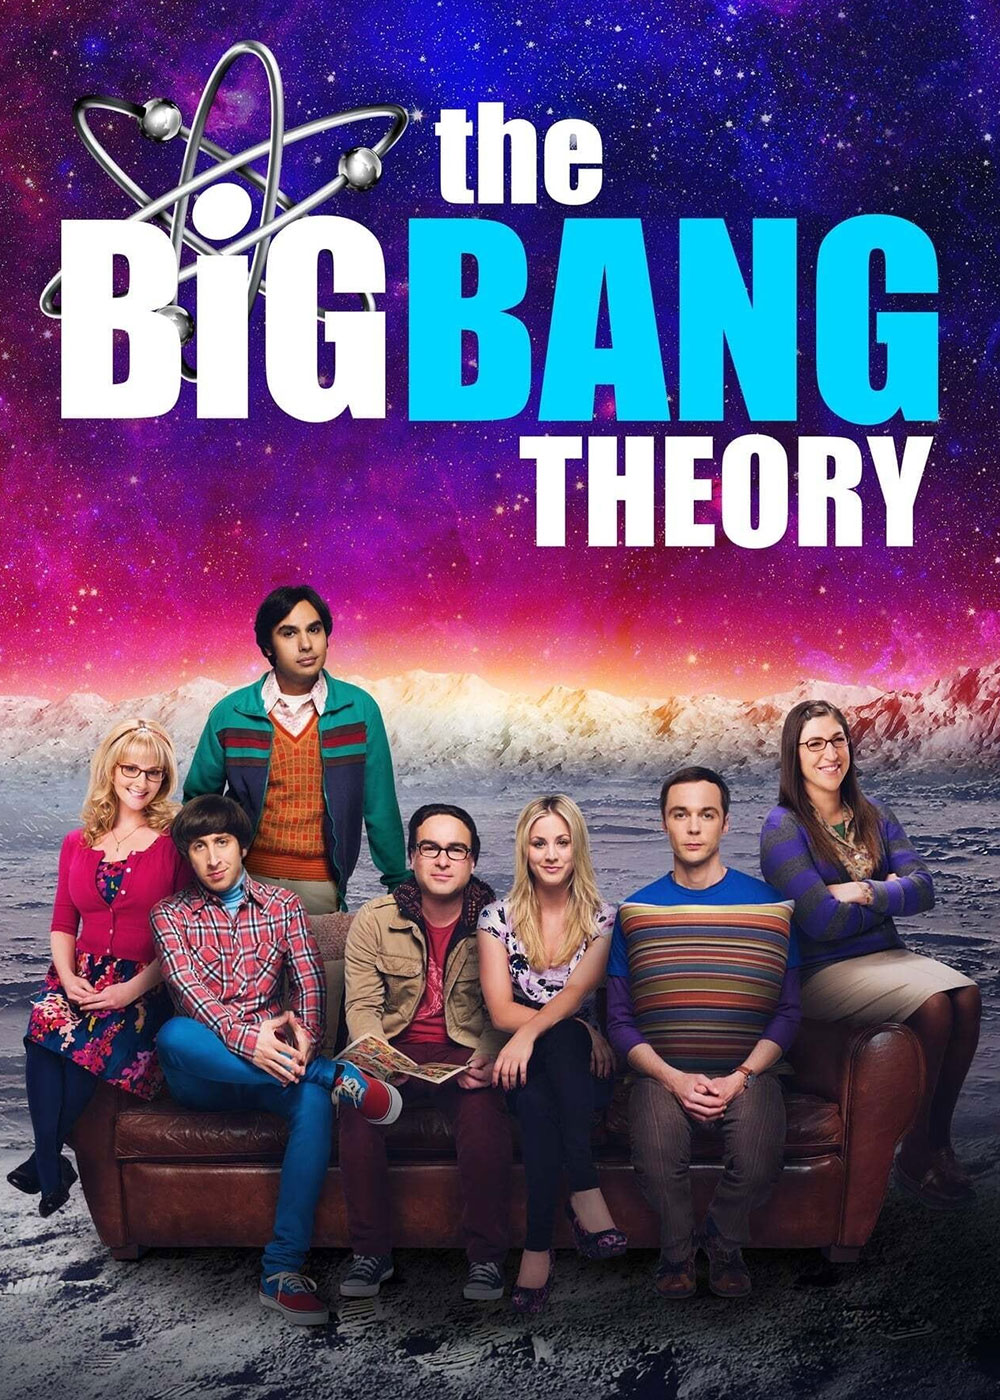 The Big Bang Theory Season 11 Web Series (2017) | Release Date, Review ...